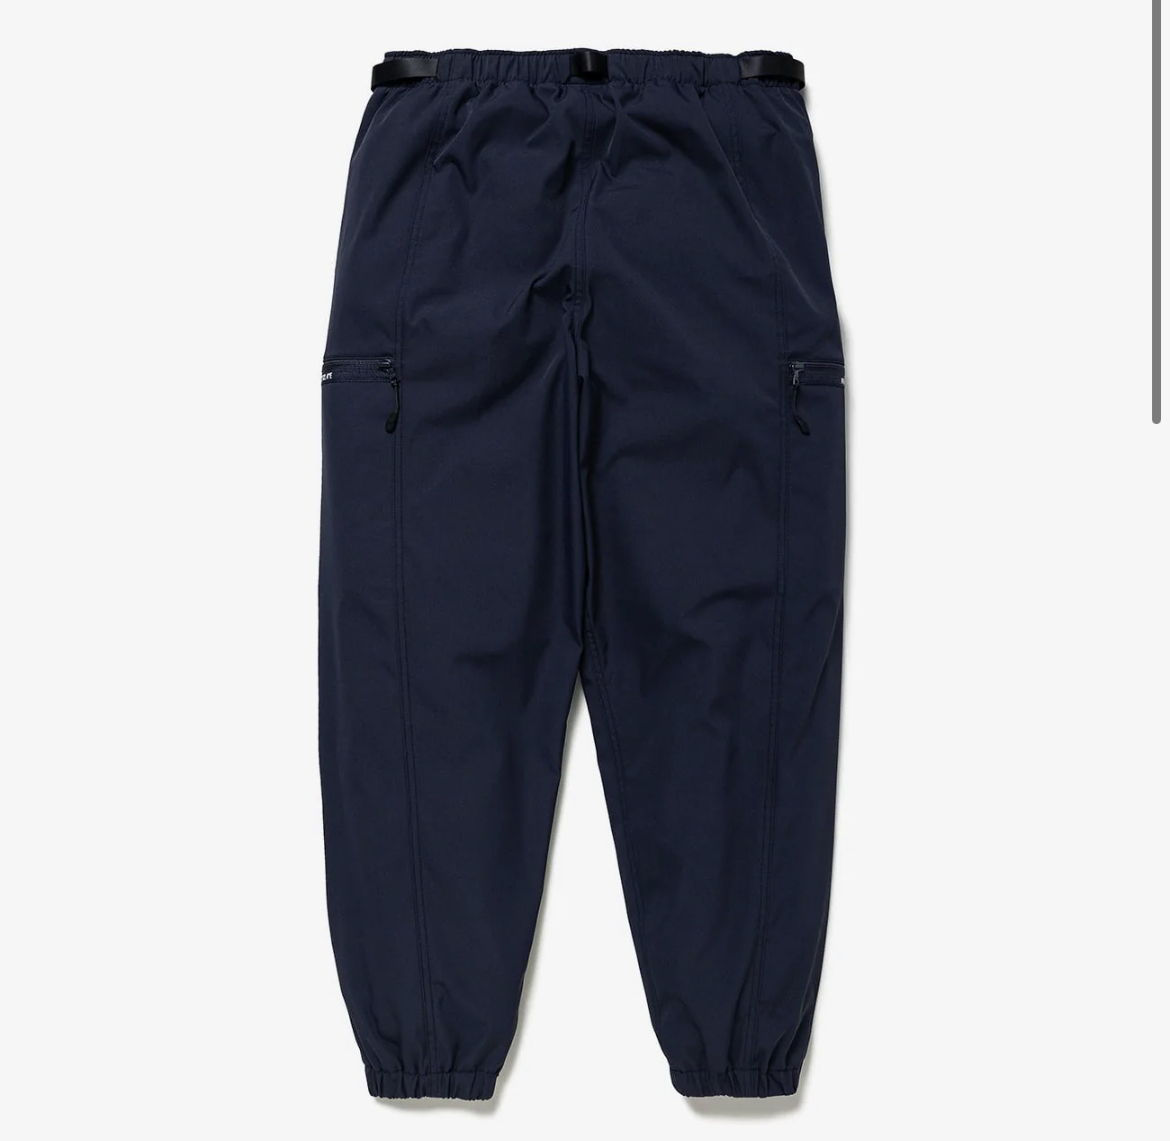 L WTAPS TRACKS TROUSERS POLY. TWILL NAVY-